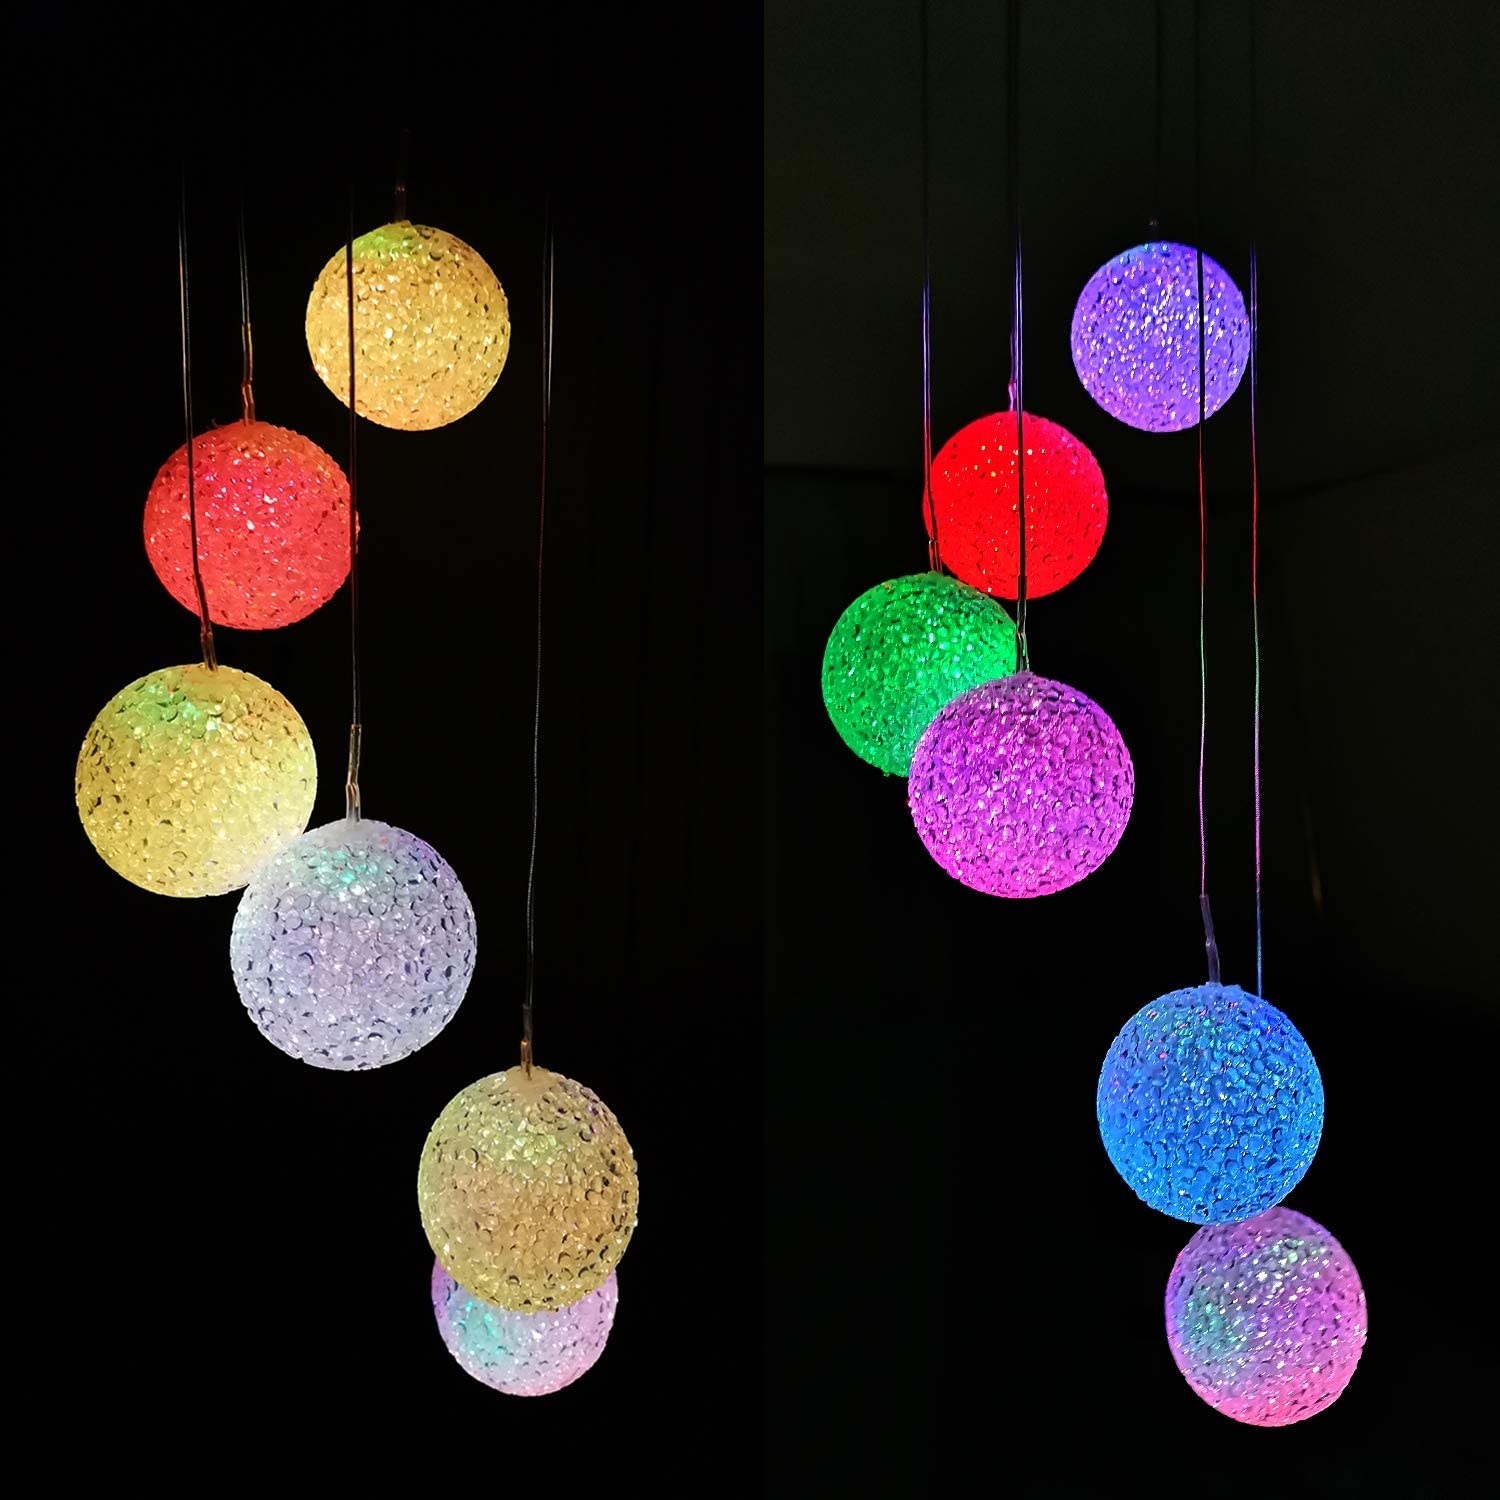 The wind chimes at night glowing in different colors